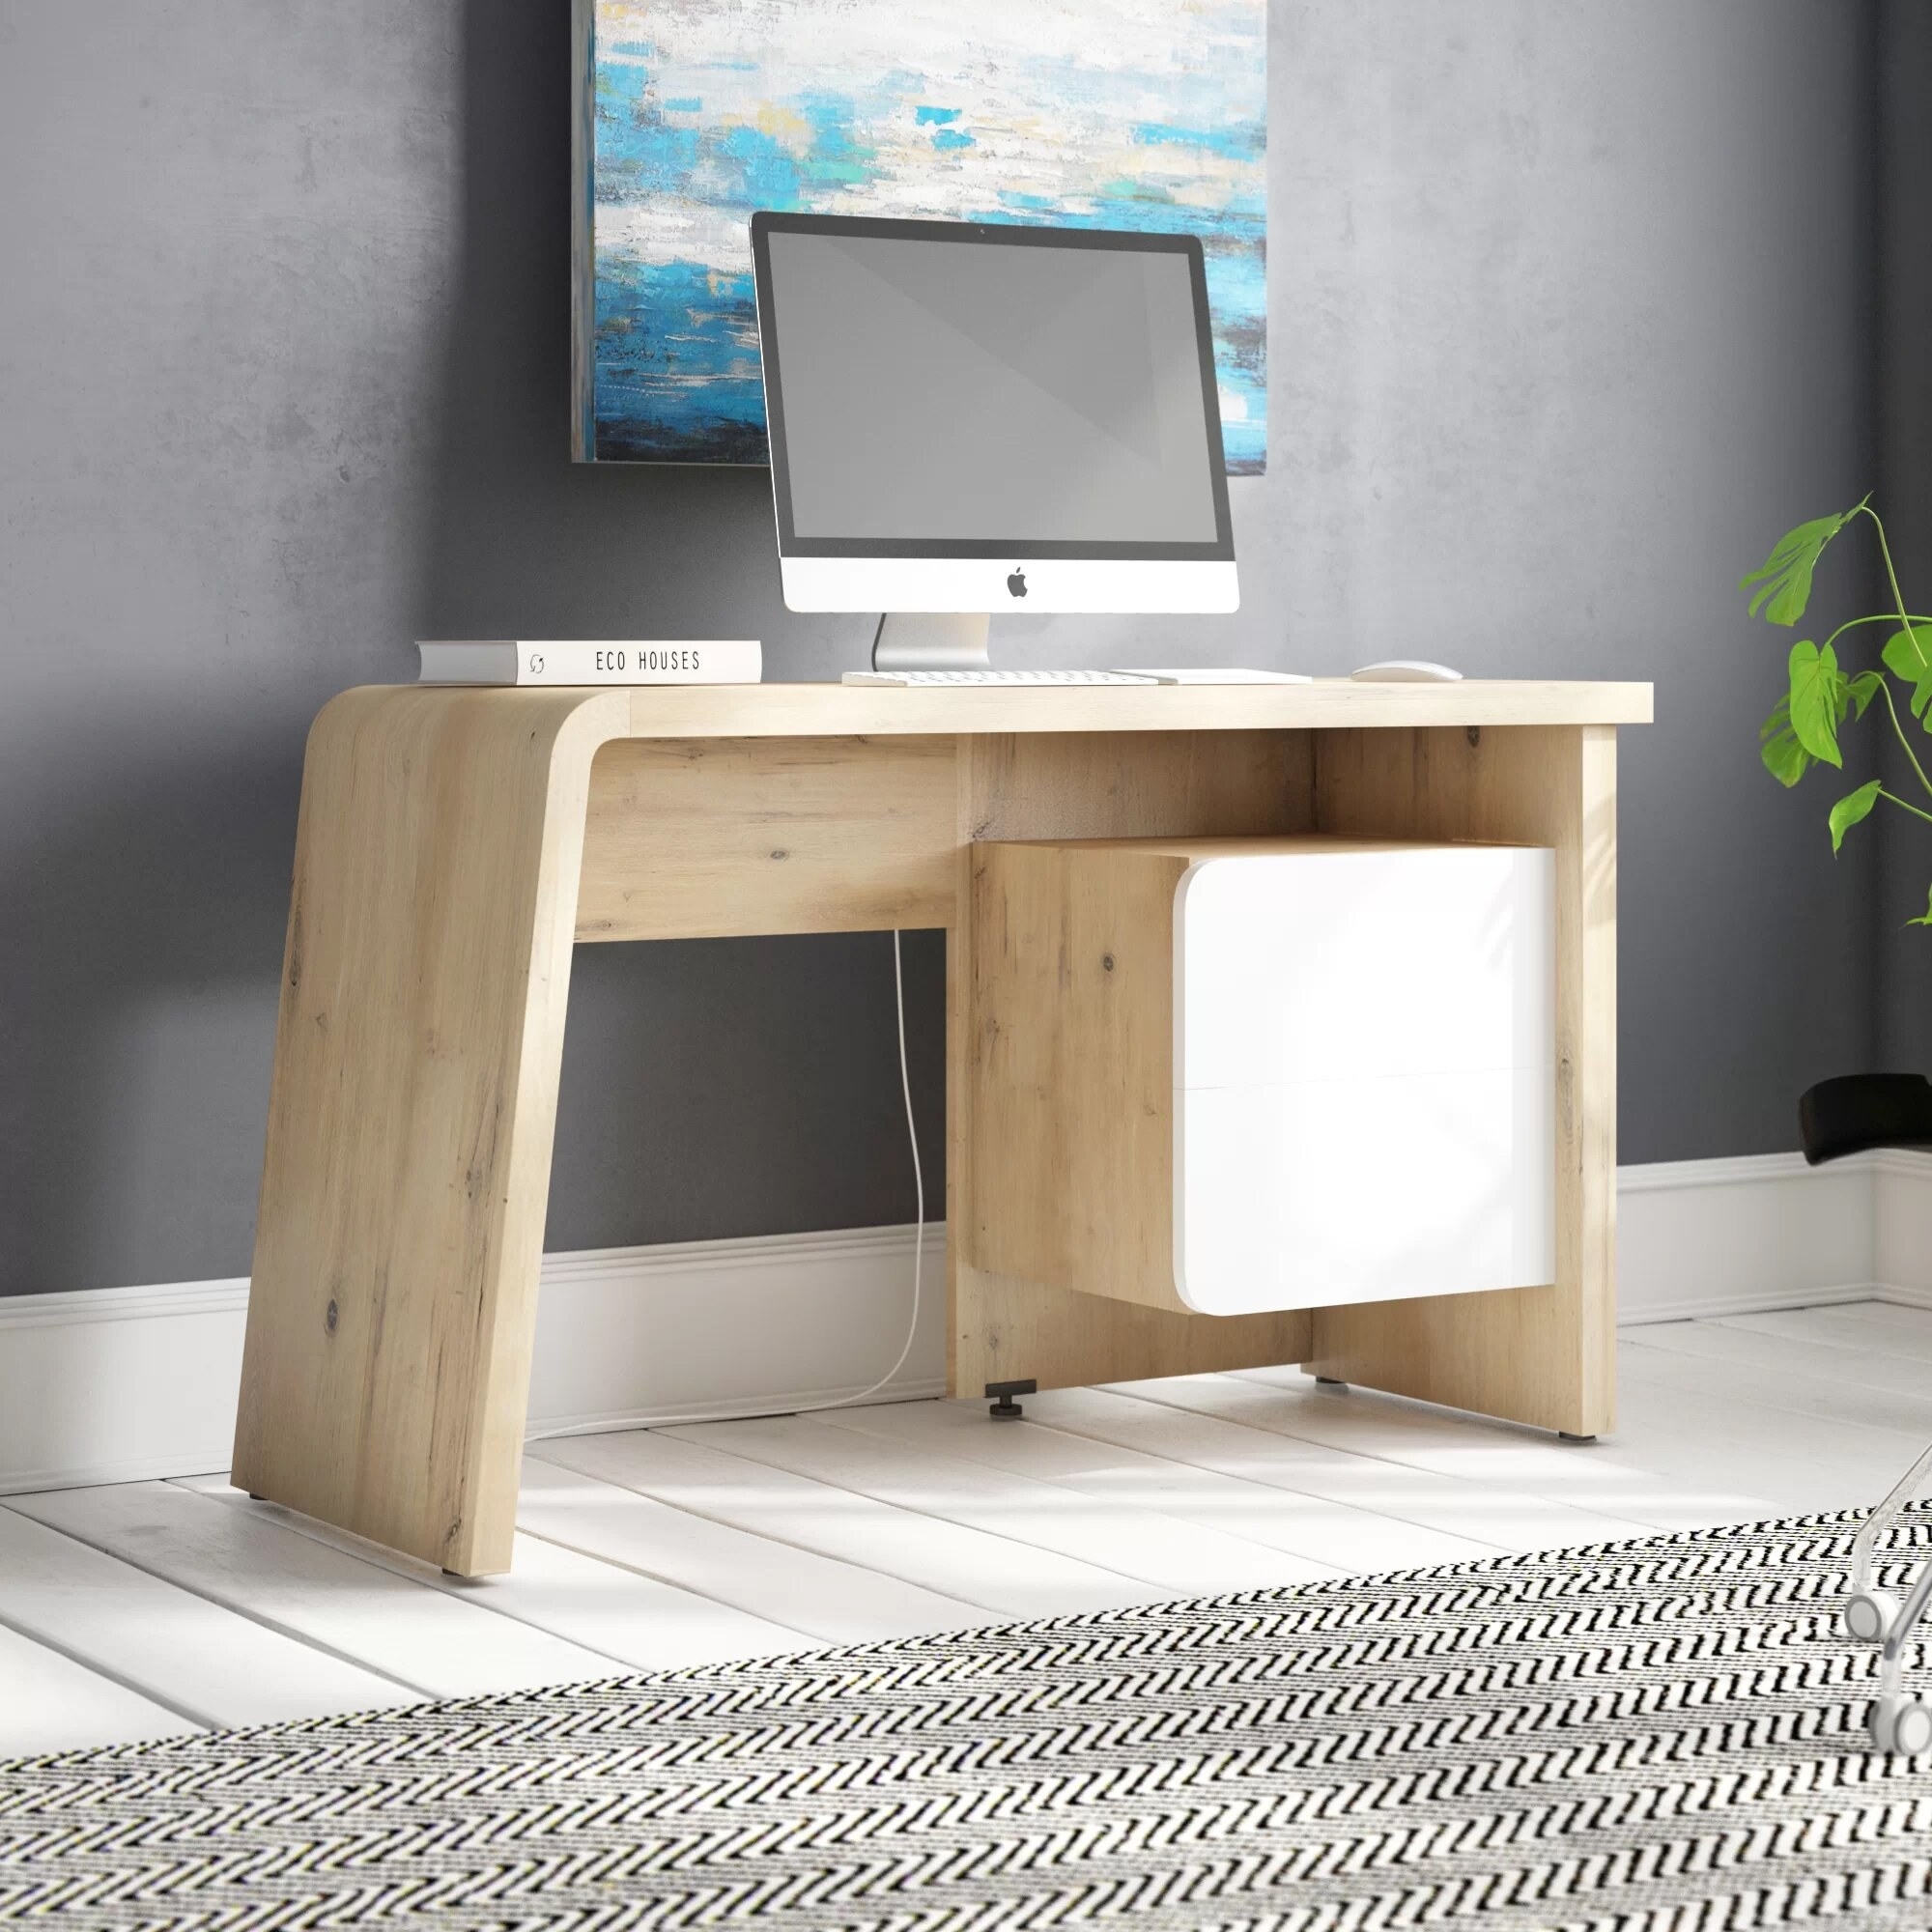 A minimalist desk with a white cabinet.